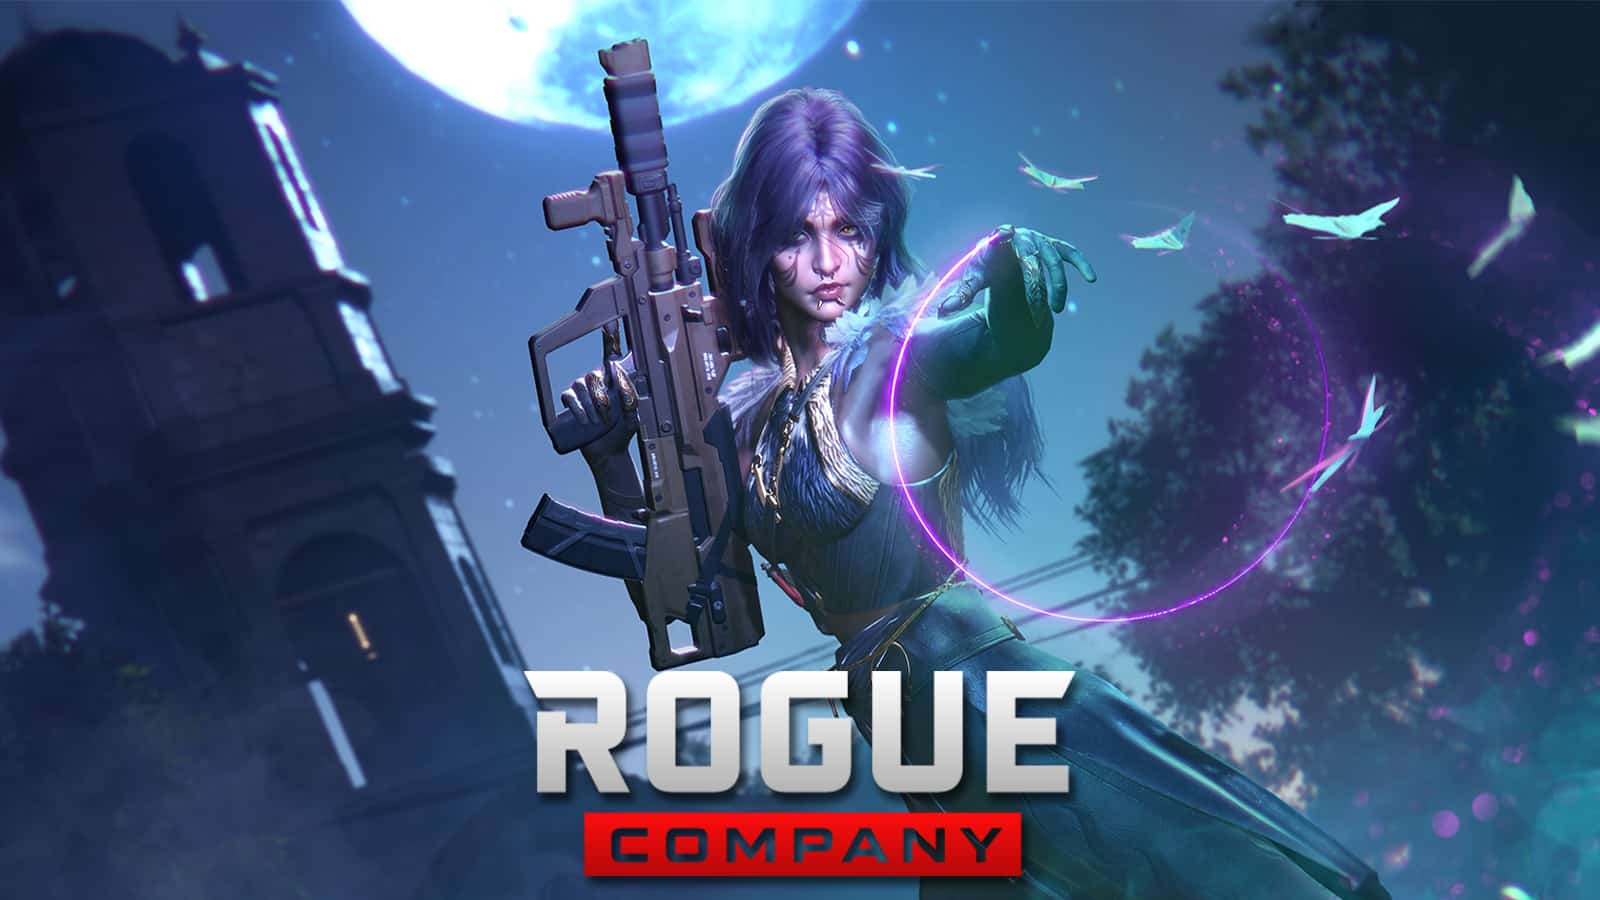 Rogue Company - Switch vs All Consoles: A 60FPS Shooter With Crossplay -  But Does It Deliver? 